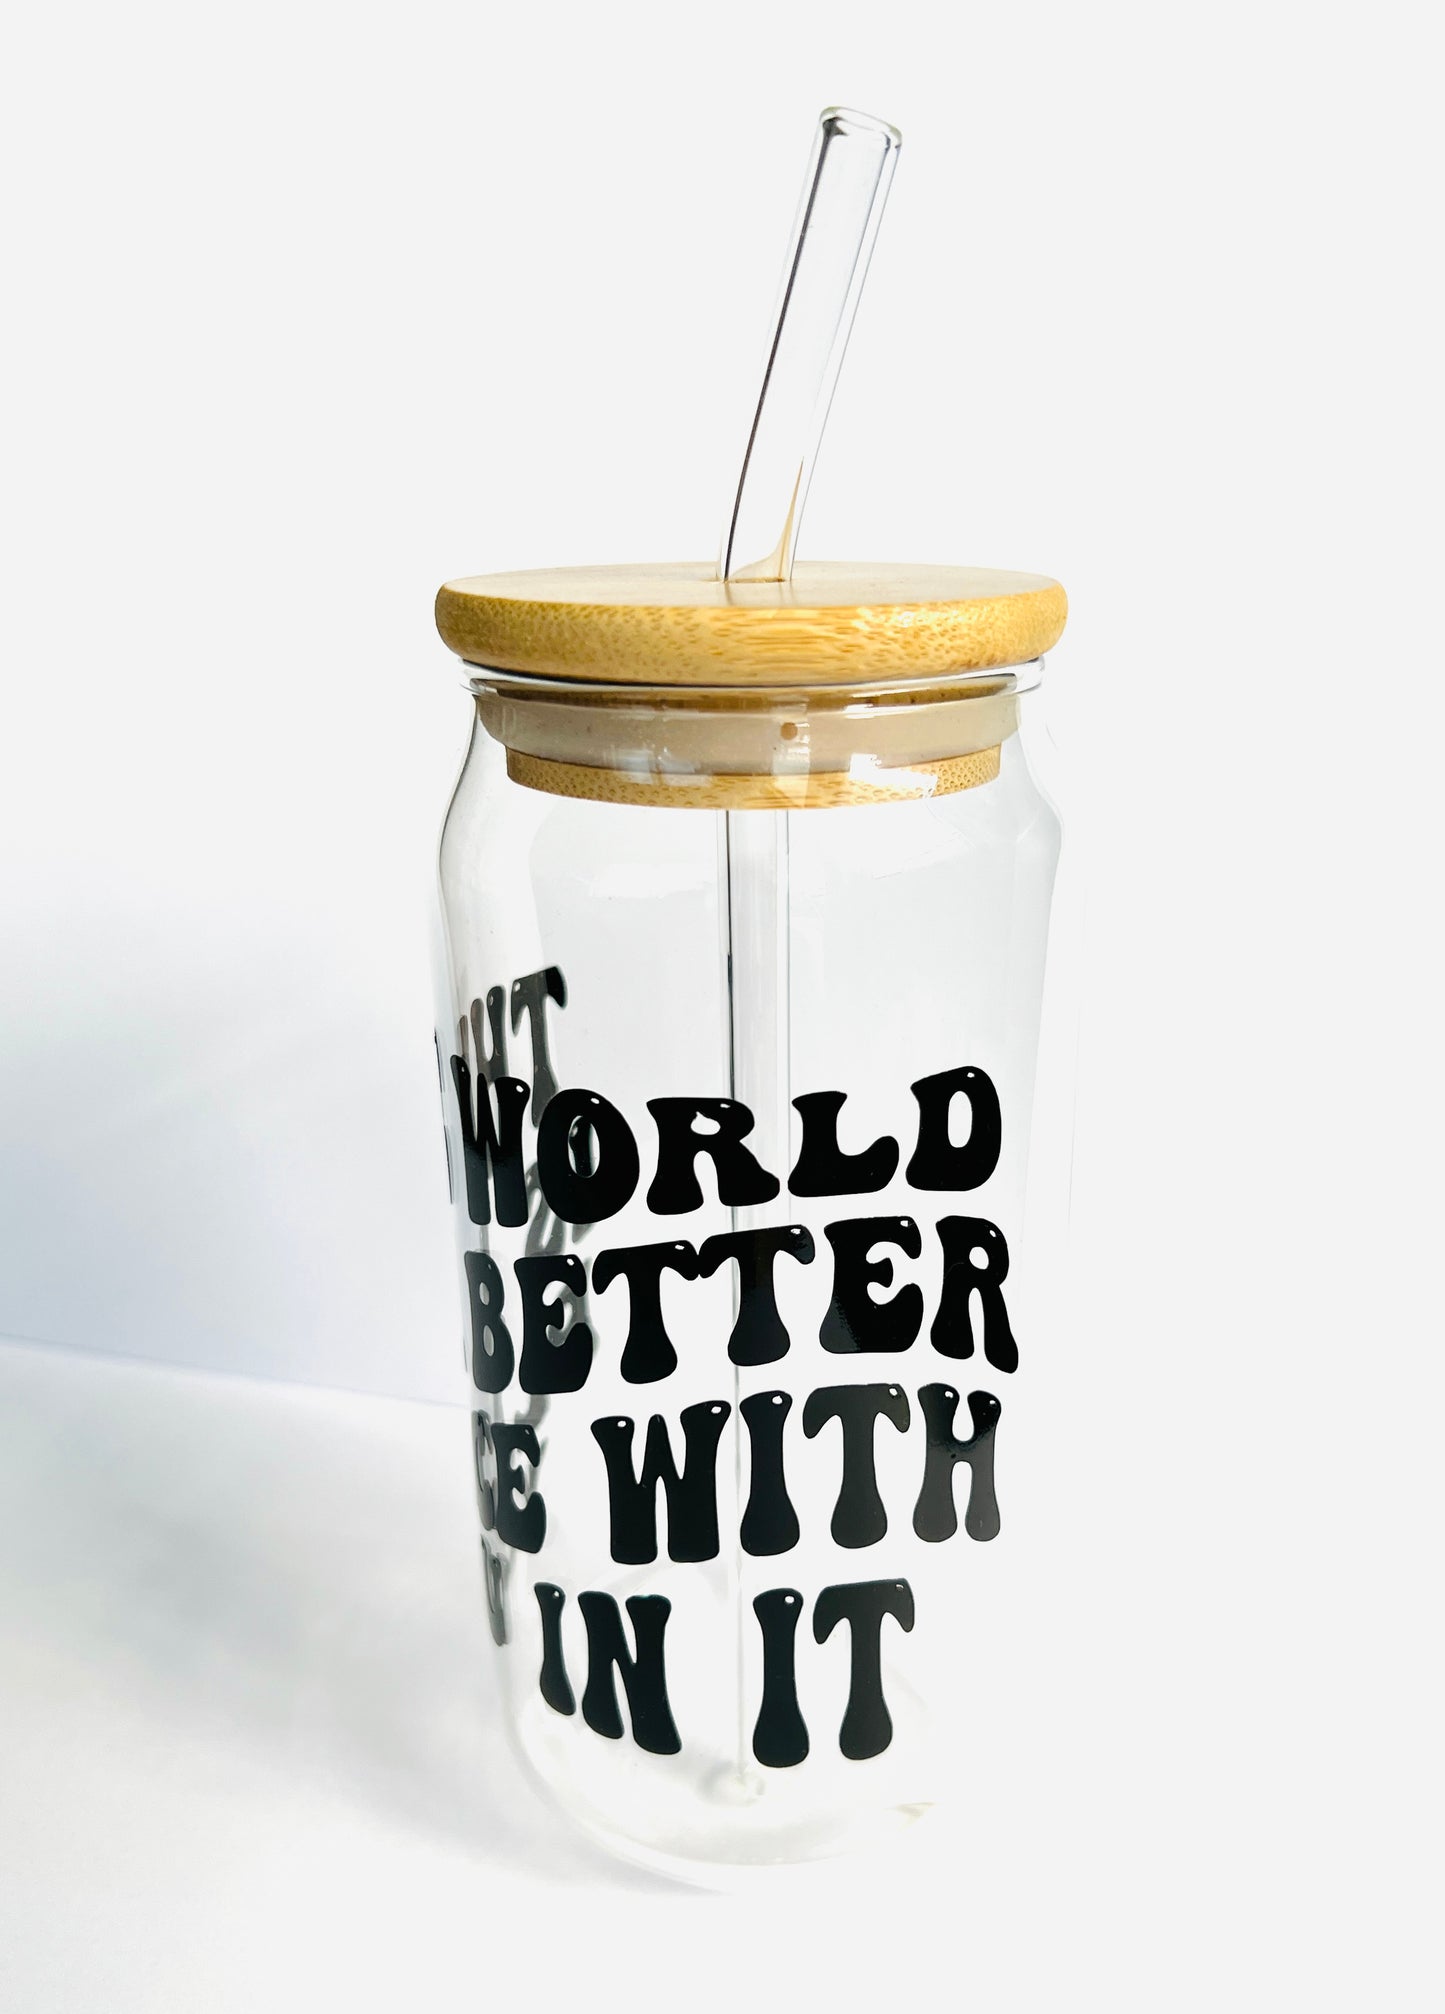 THE WORLD IS A BETTER PLACE drinking glass